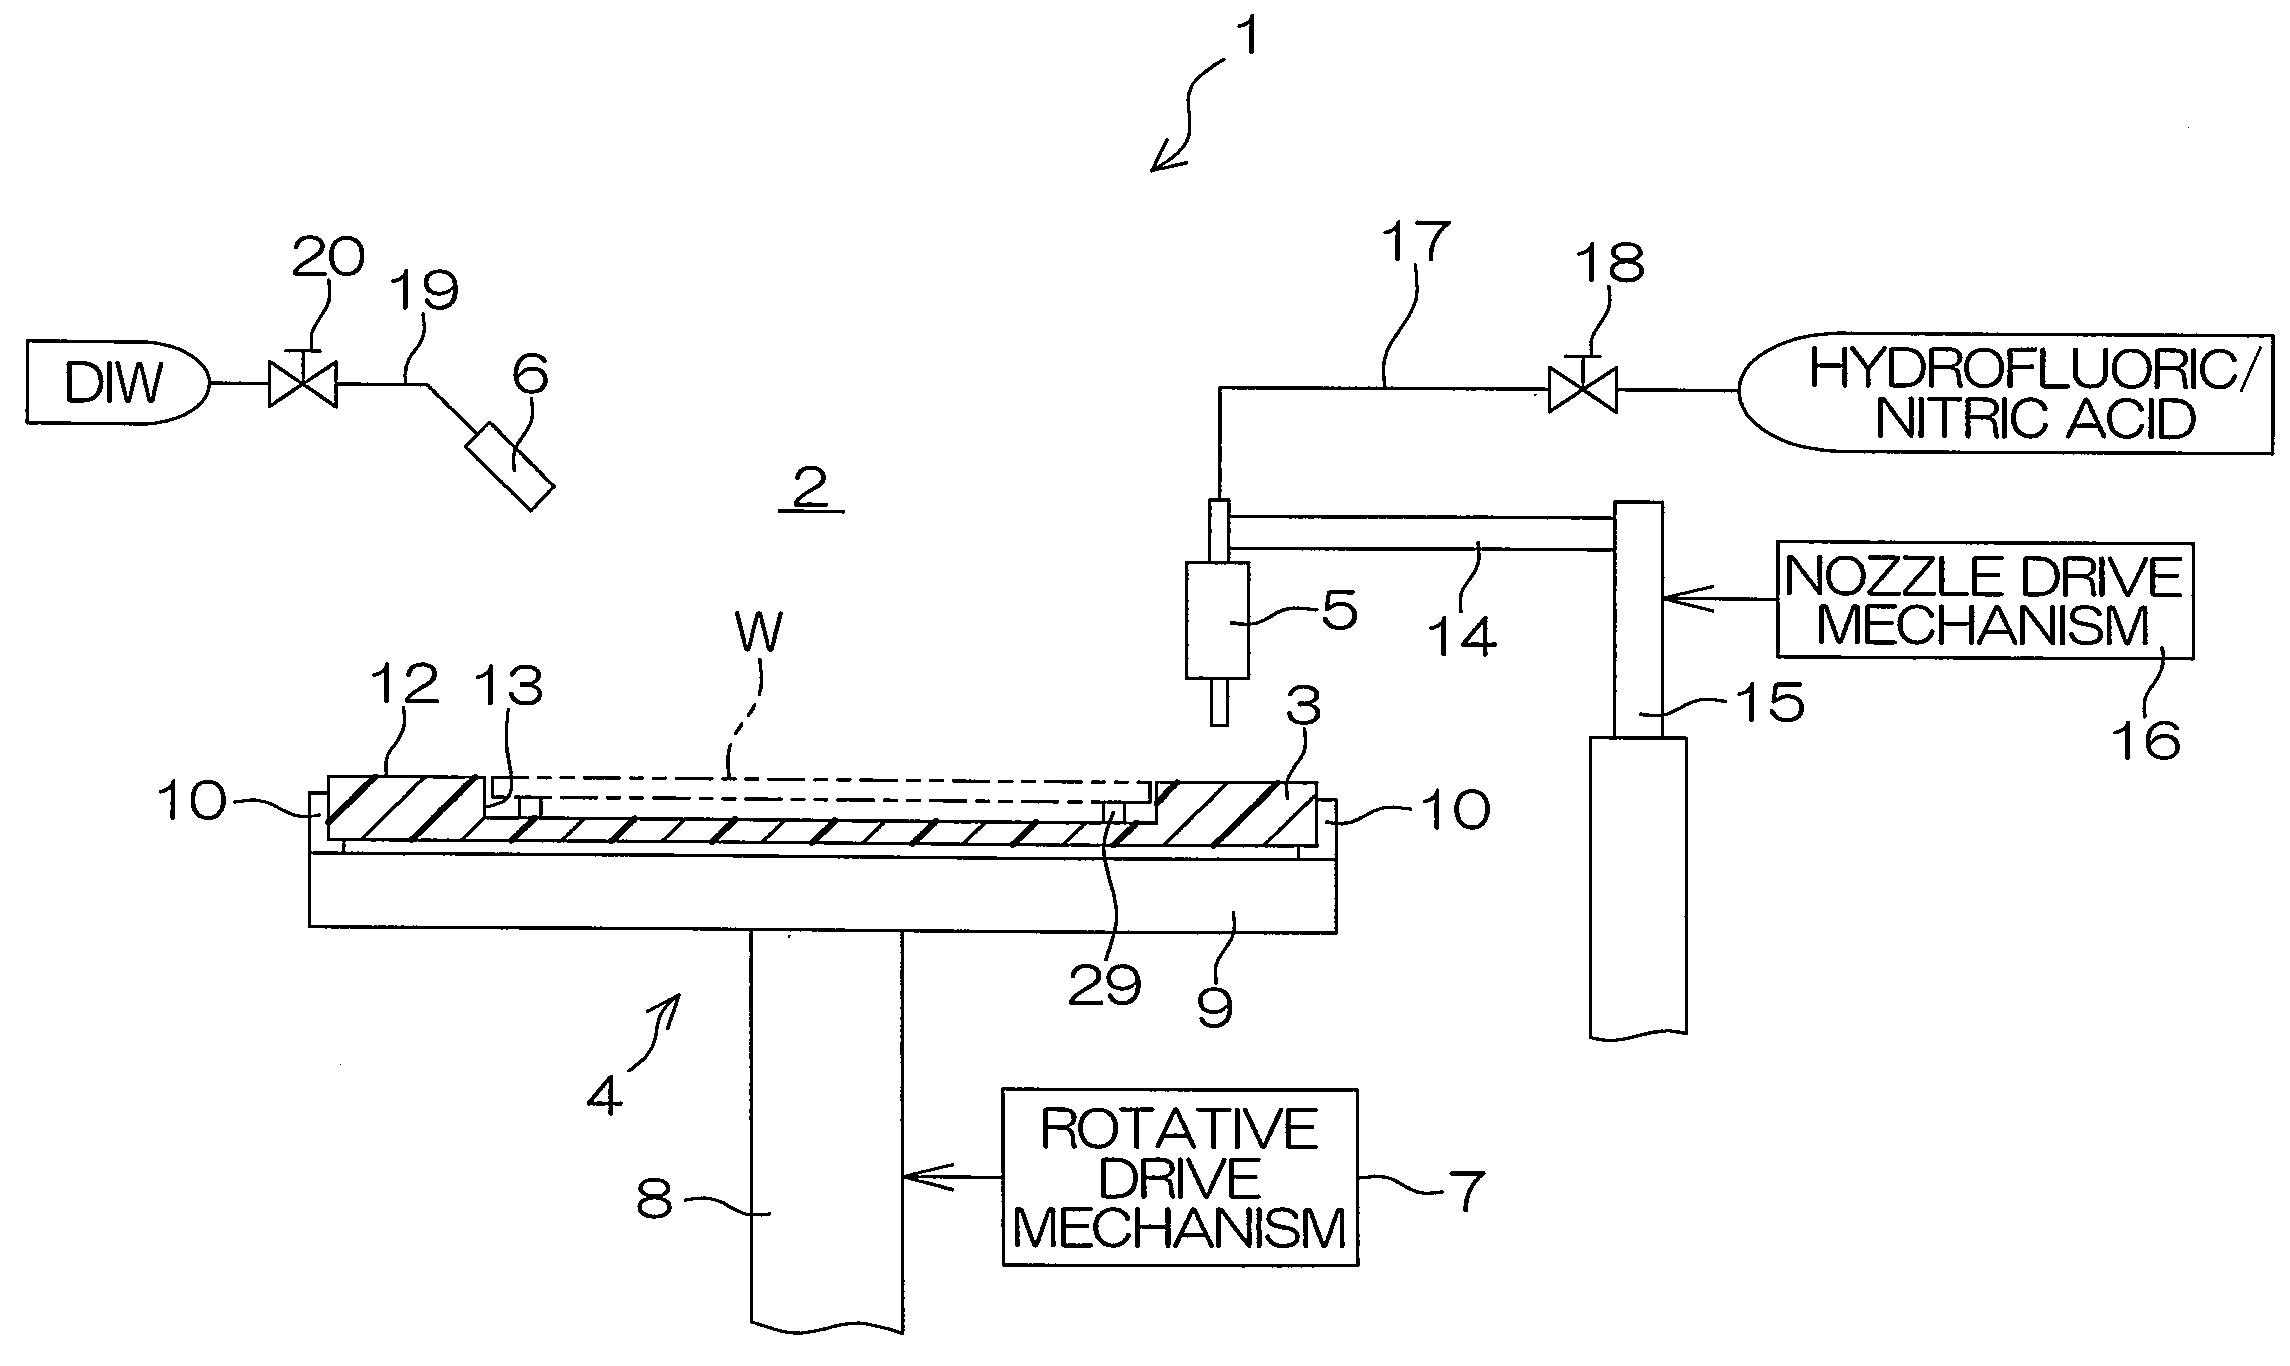 Substrate treatment apparatus, and substrate support to be used for the apparatus